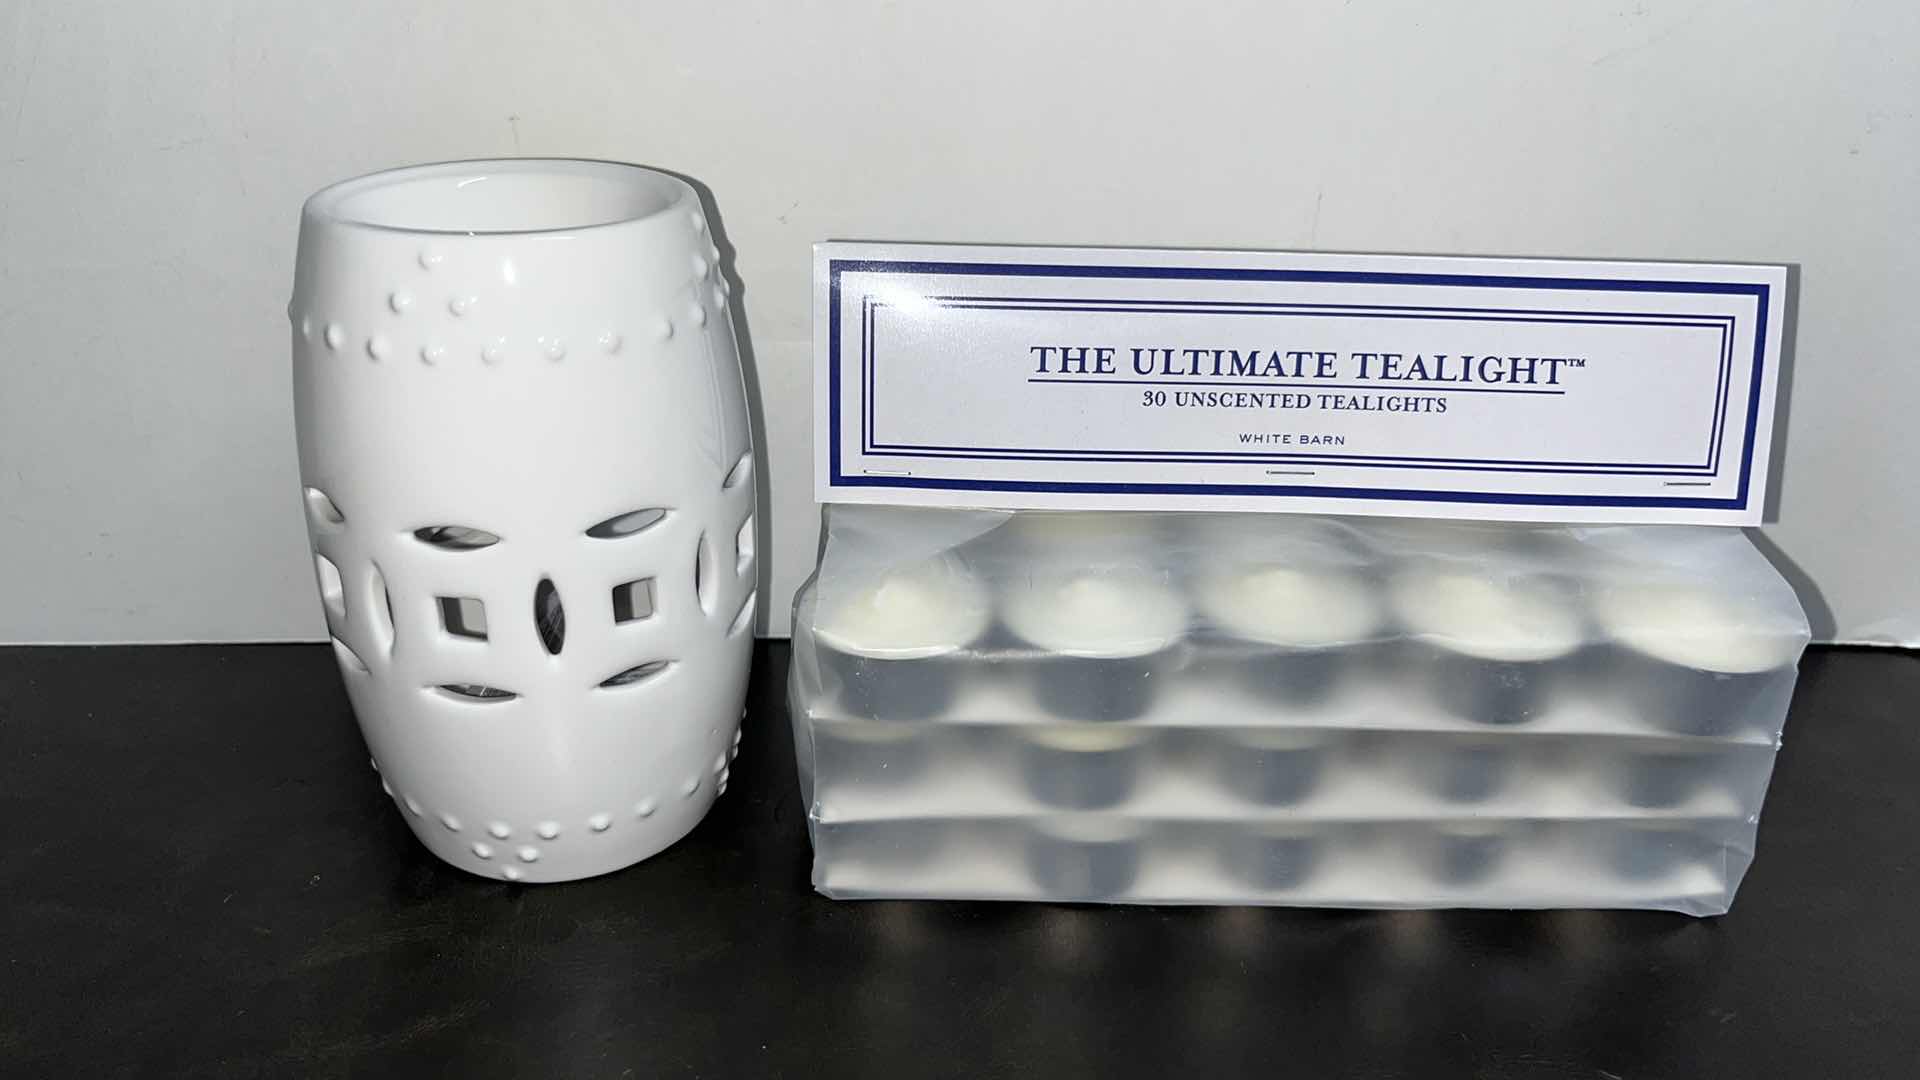 Photo 1 of NEW SLATKIN & CO WHITE FRAGRANCE OIL WARMER & WHITE BARN CANDLE CO 30 CT UNSCENTED TEALIGHTS